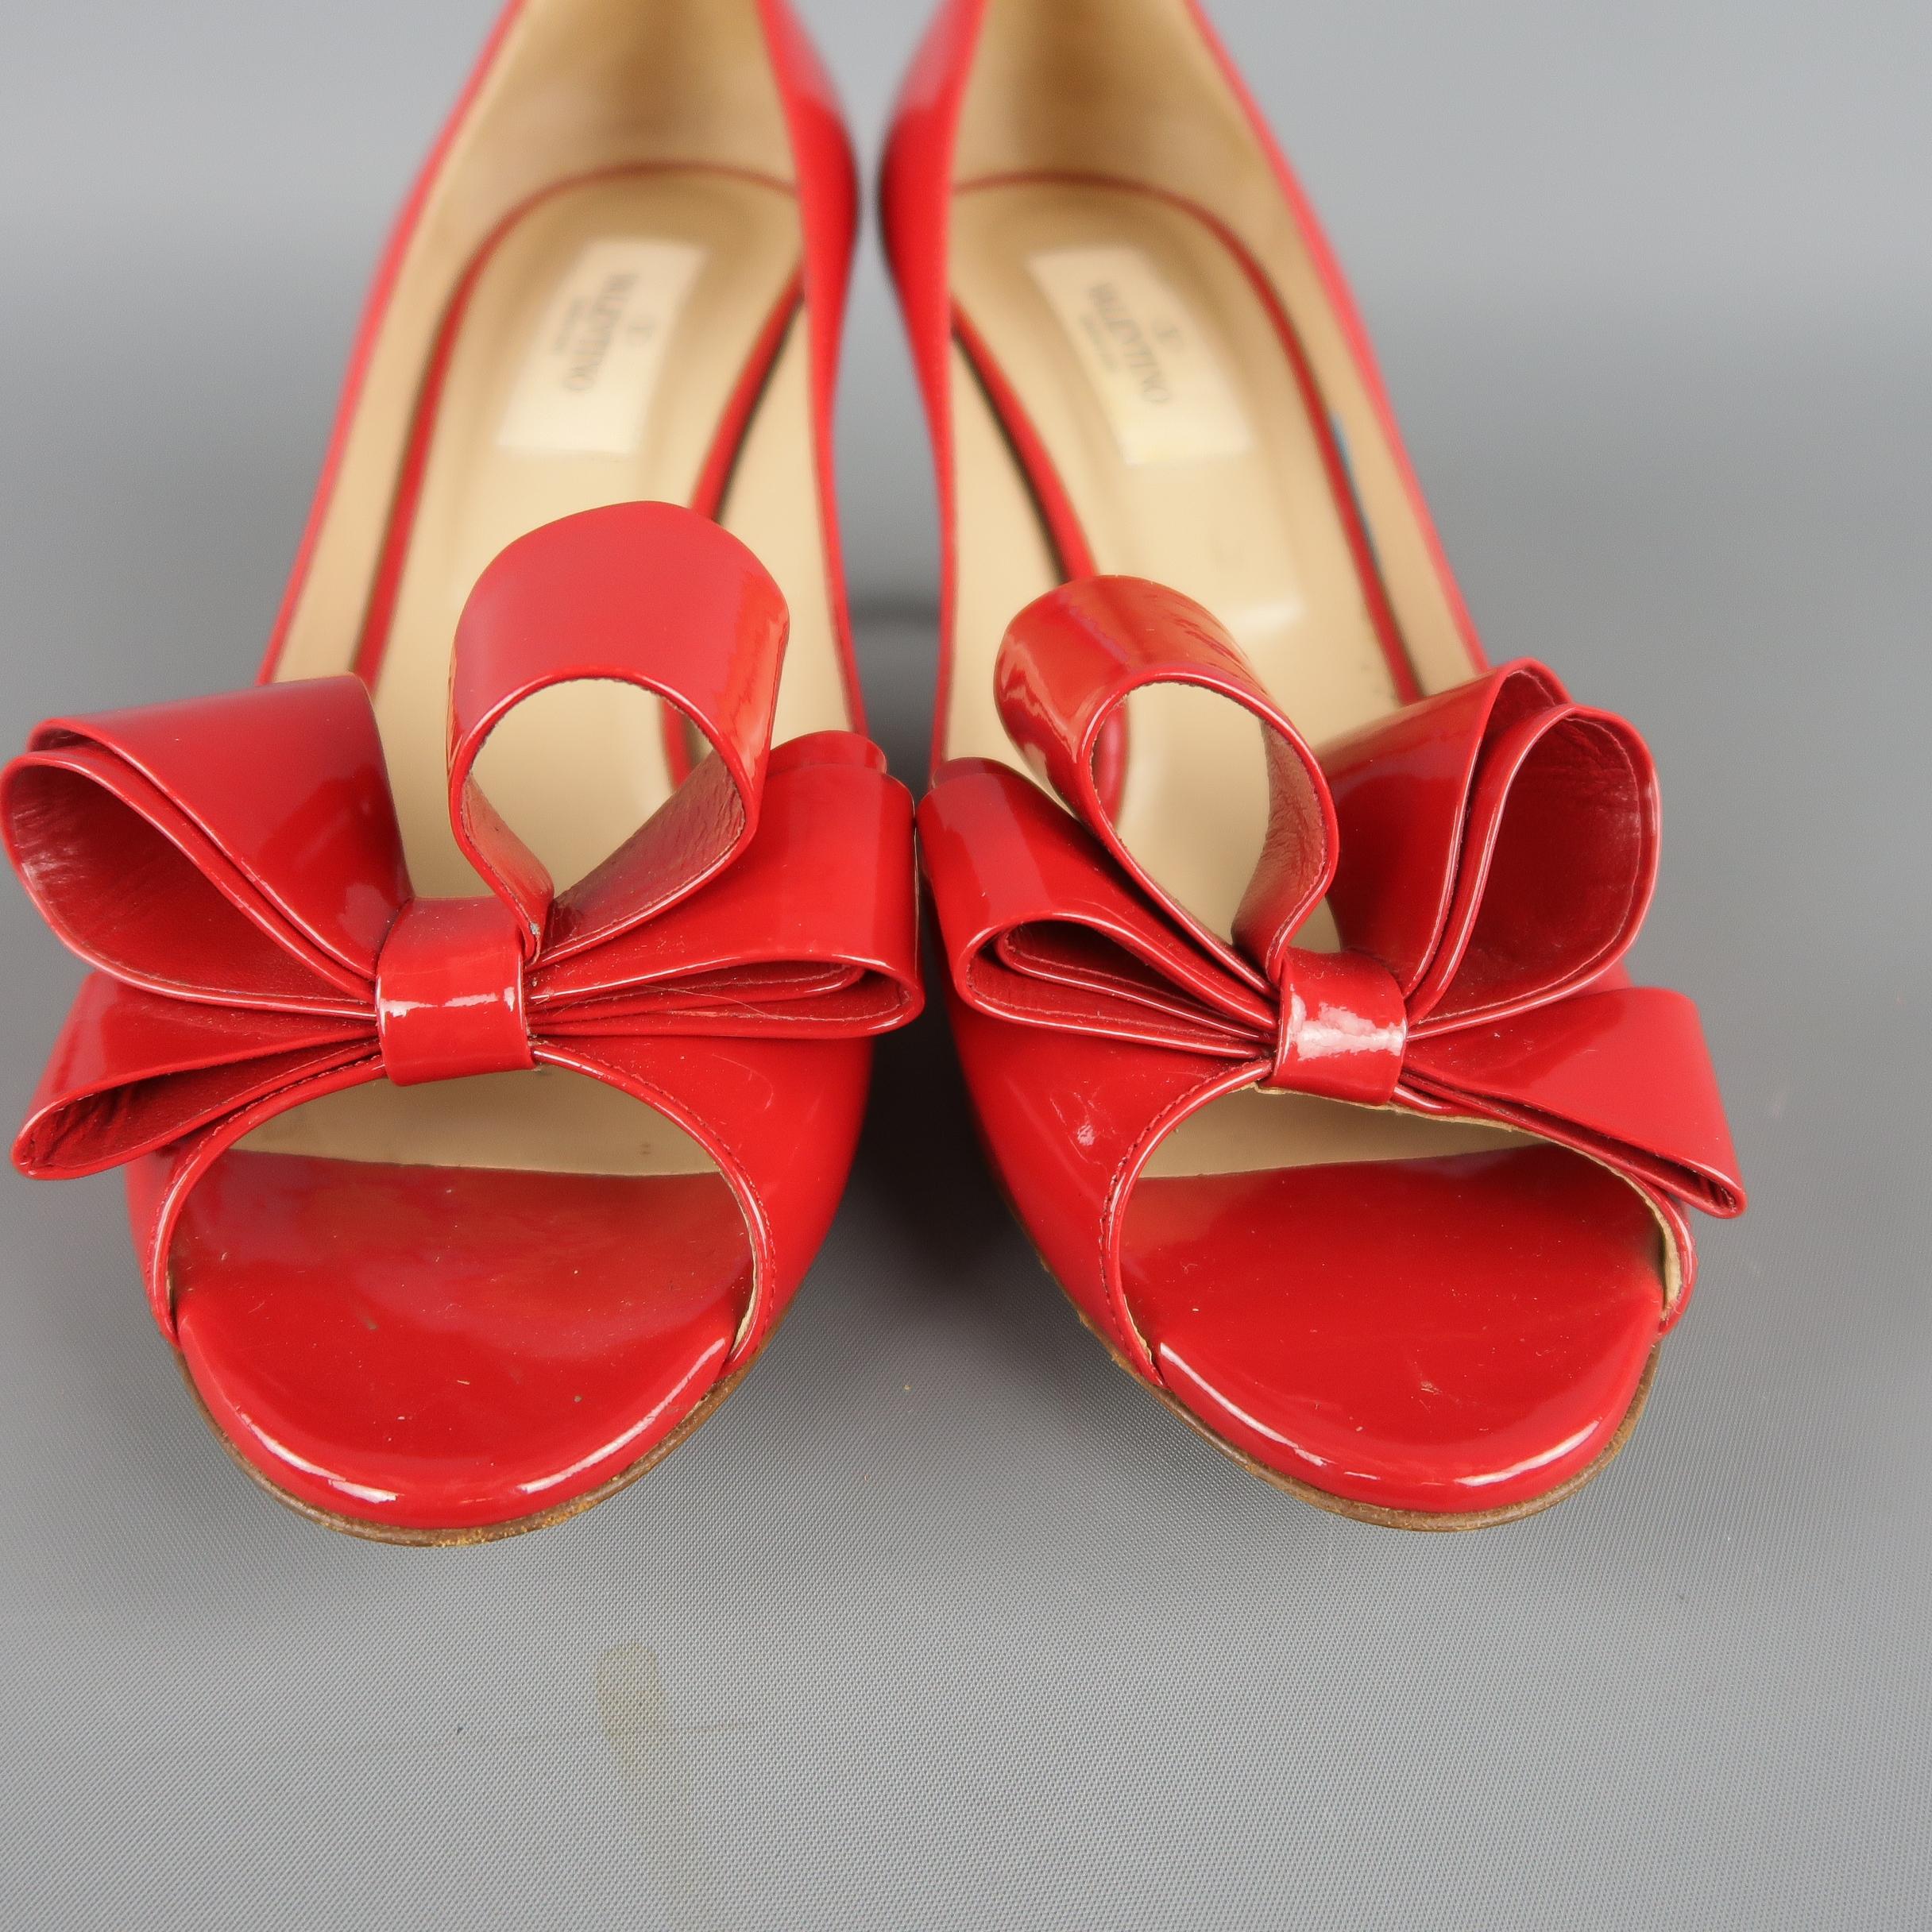 Women's VALENTINO Size 8.5 Red Patent Leather Bow Peep Toe Pumps